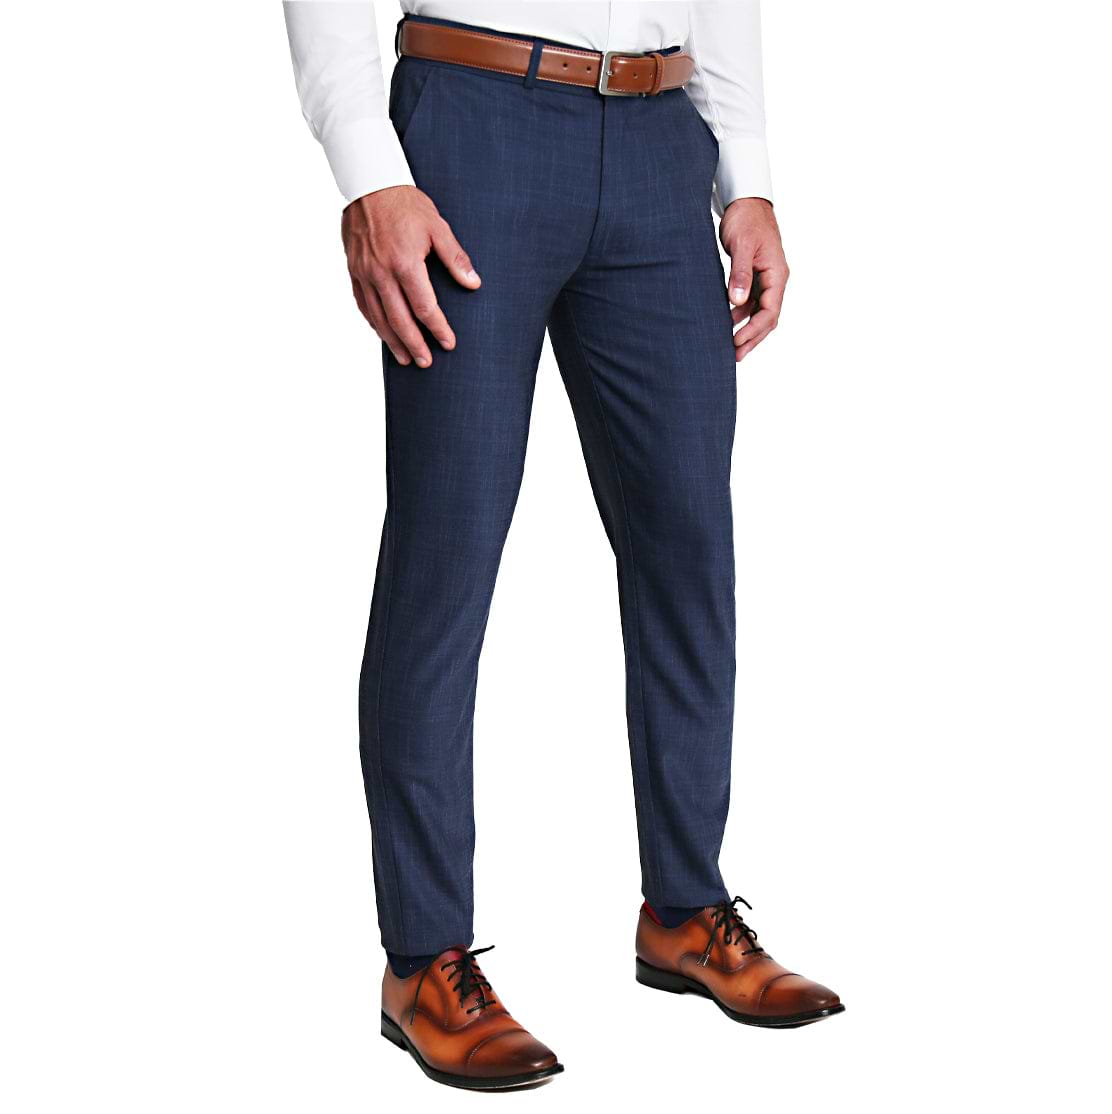 52 Best Chinos And Shirt Combinations For Men - Fashion Hombre | Navy blue  pants outfit, Blue pants men, Blue shirt outfits